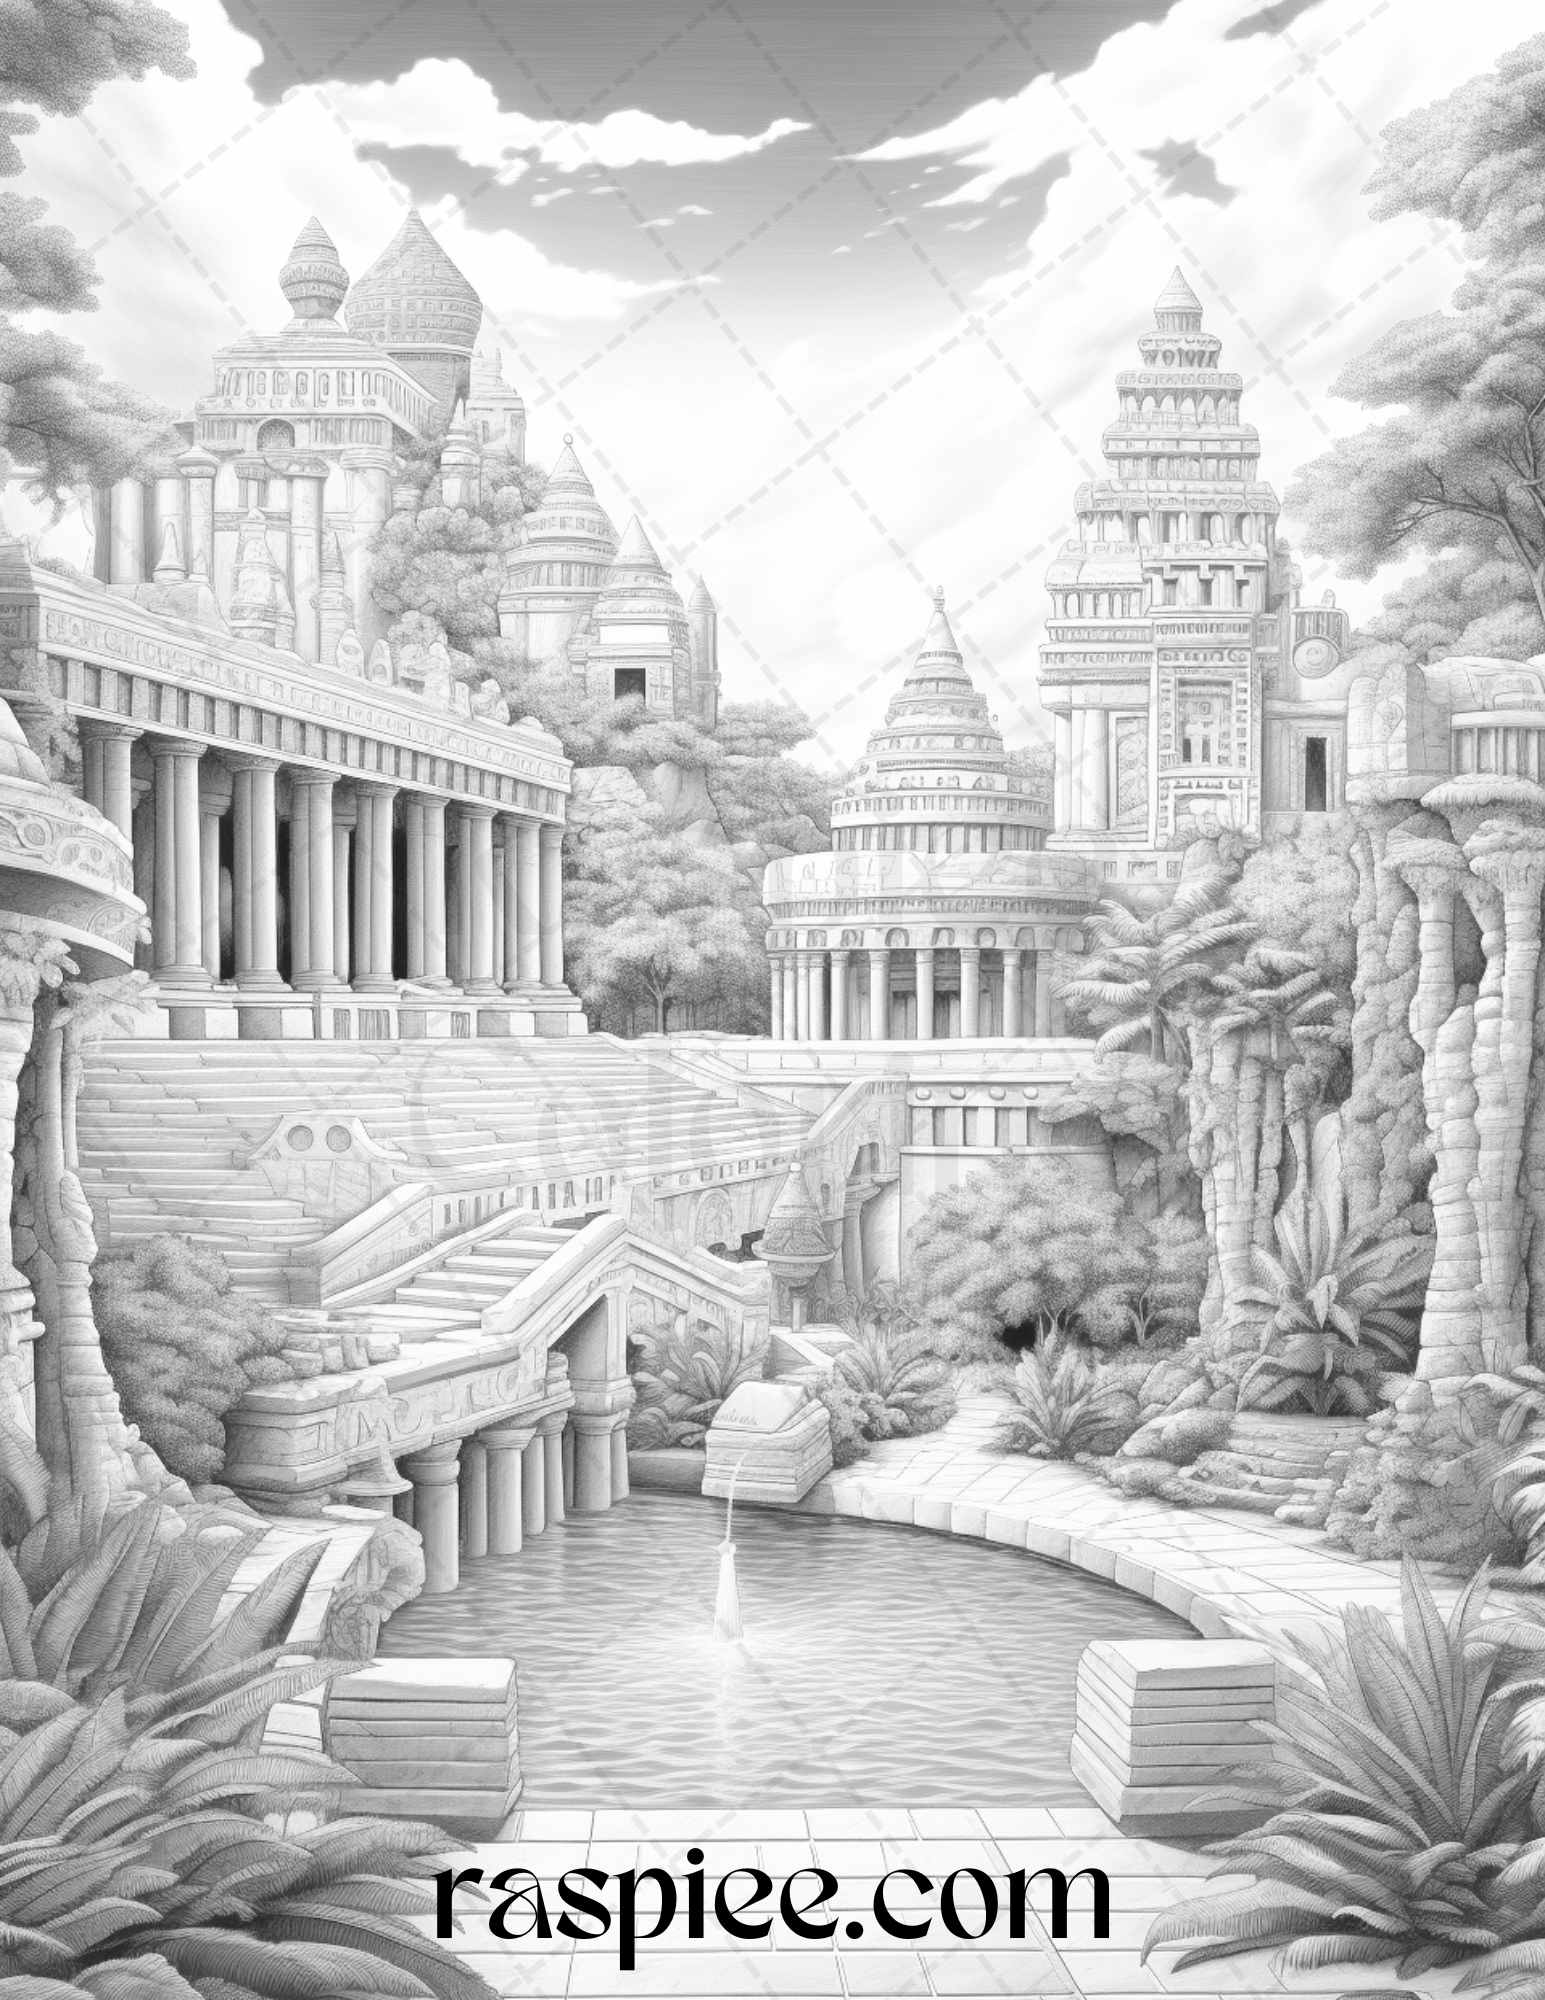 Hanging Gardens of Babylon Grayscale Coloring Pages Printable, PDF File Instant Download - Raspiee Coloring